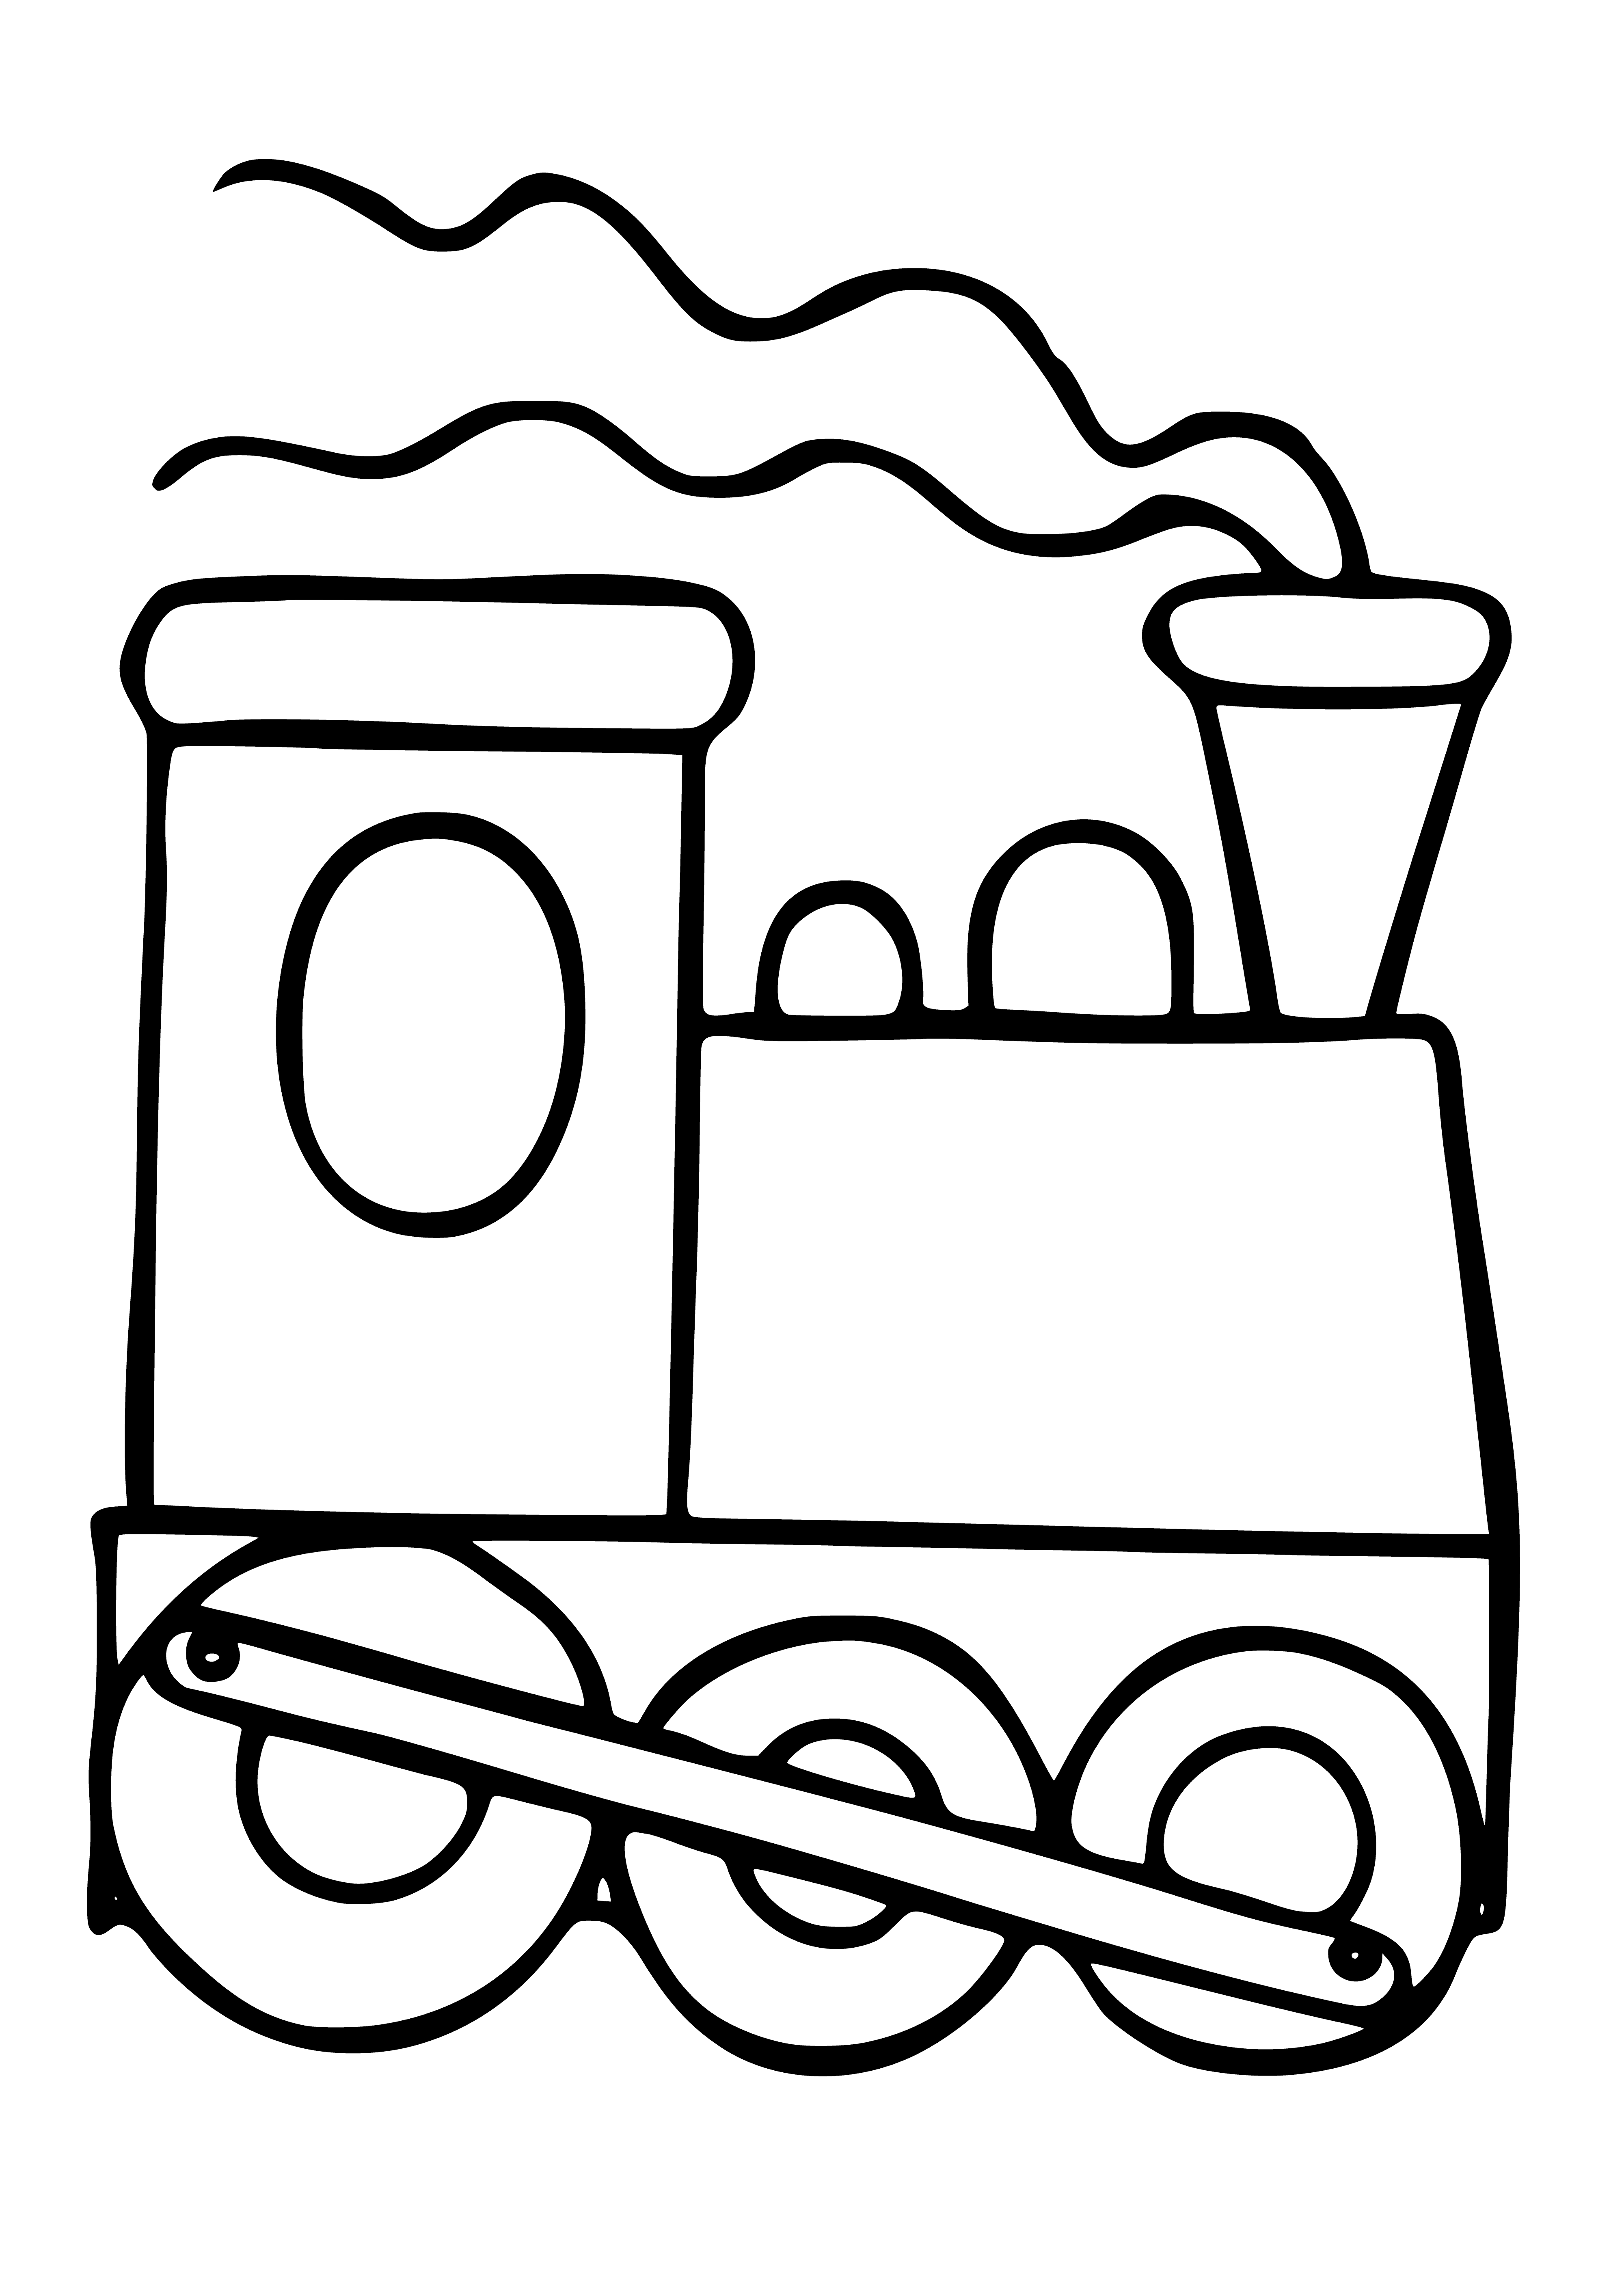 coloring page: Train chugging down tracks w/ black locomotive & 3 cars (yellow, green & blue). Trees & hills in the distance.